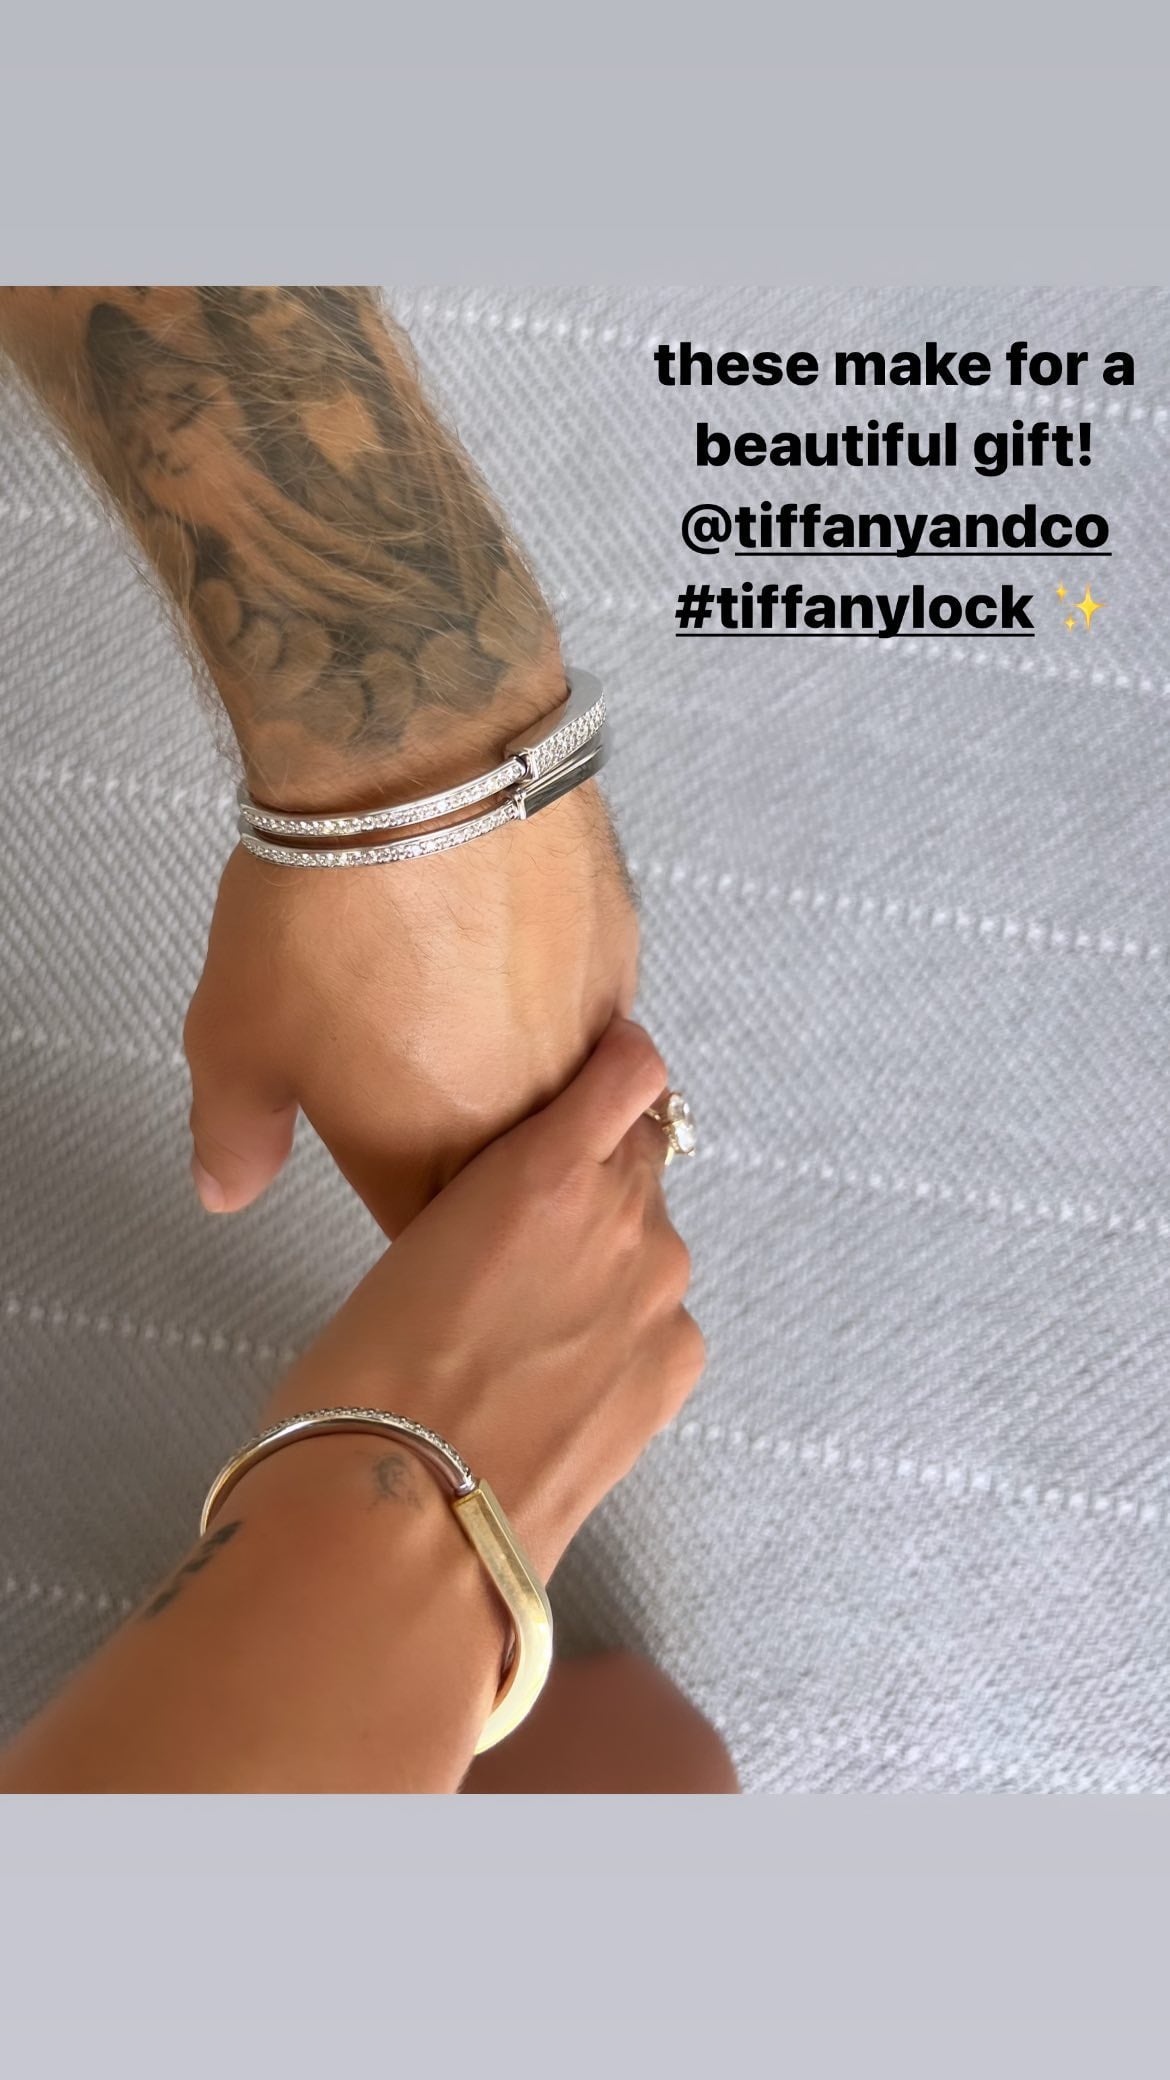 Hailey Bieber can't get enough of this Tiffany bracelet and neither can we